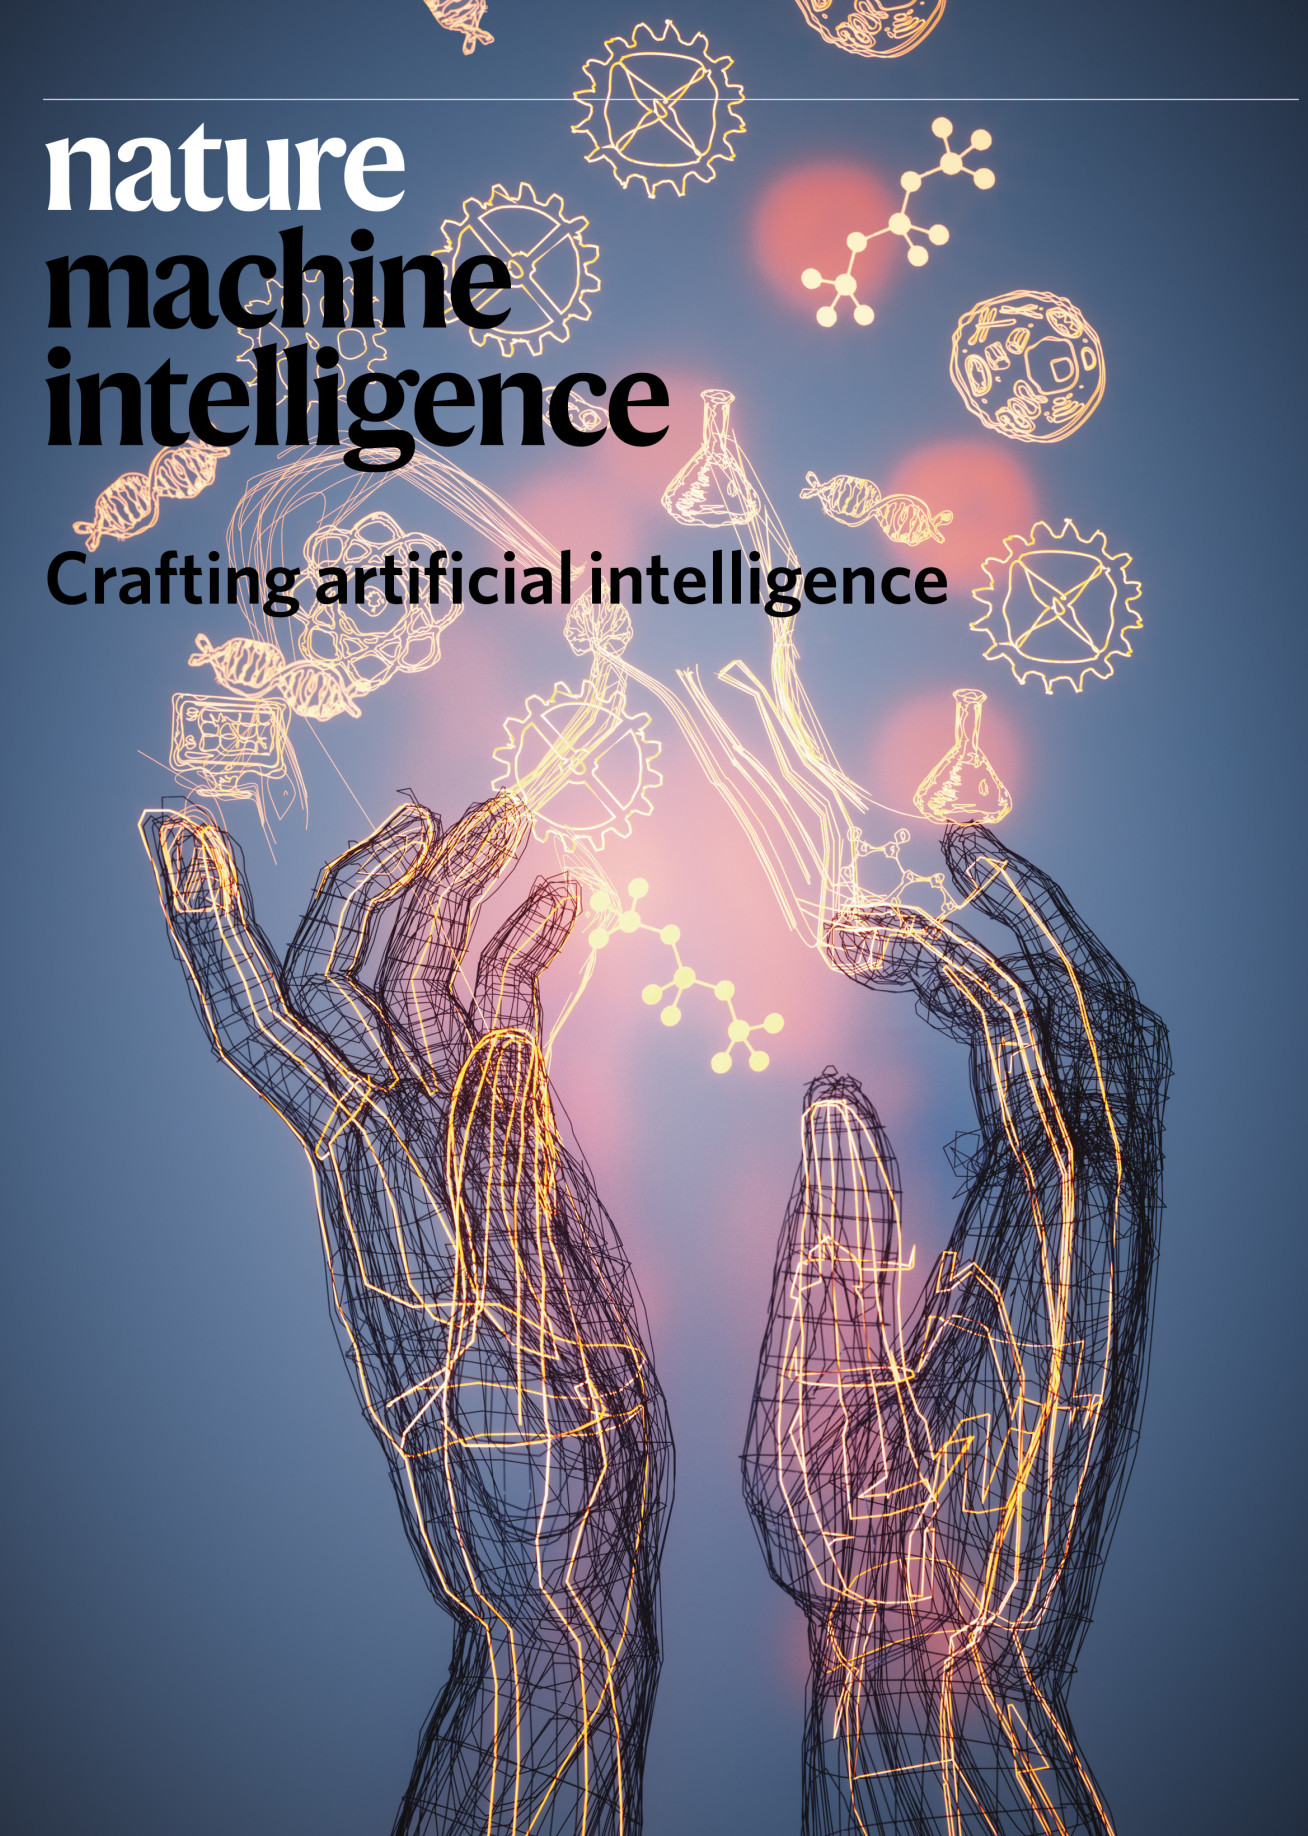 Photo of cover of Nature Machine Intelligence. It shows two robotic hands reaching upwards, with the caption 'crafting artificial intelligence'